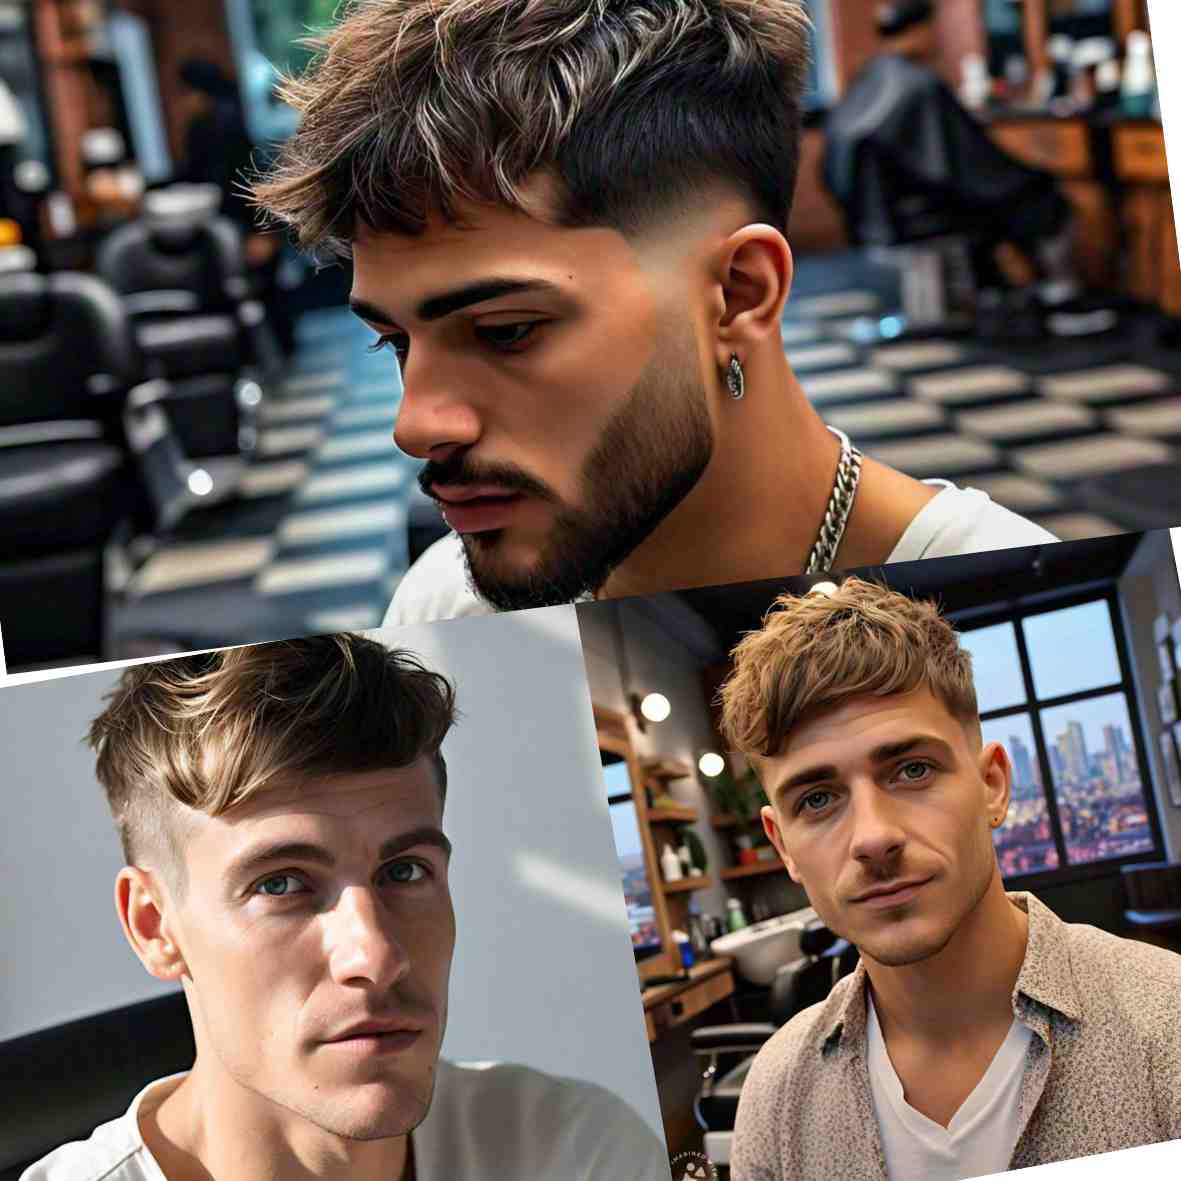 Pixie haircuts for men, stylish and bold short hairstyles for men